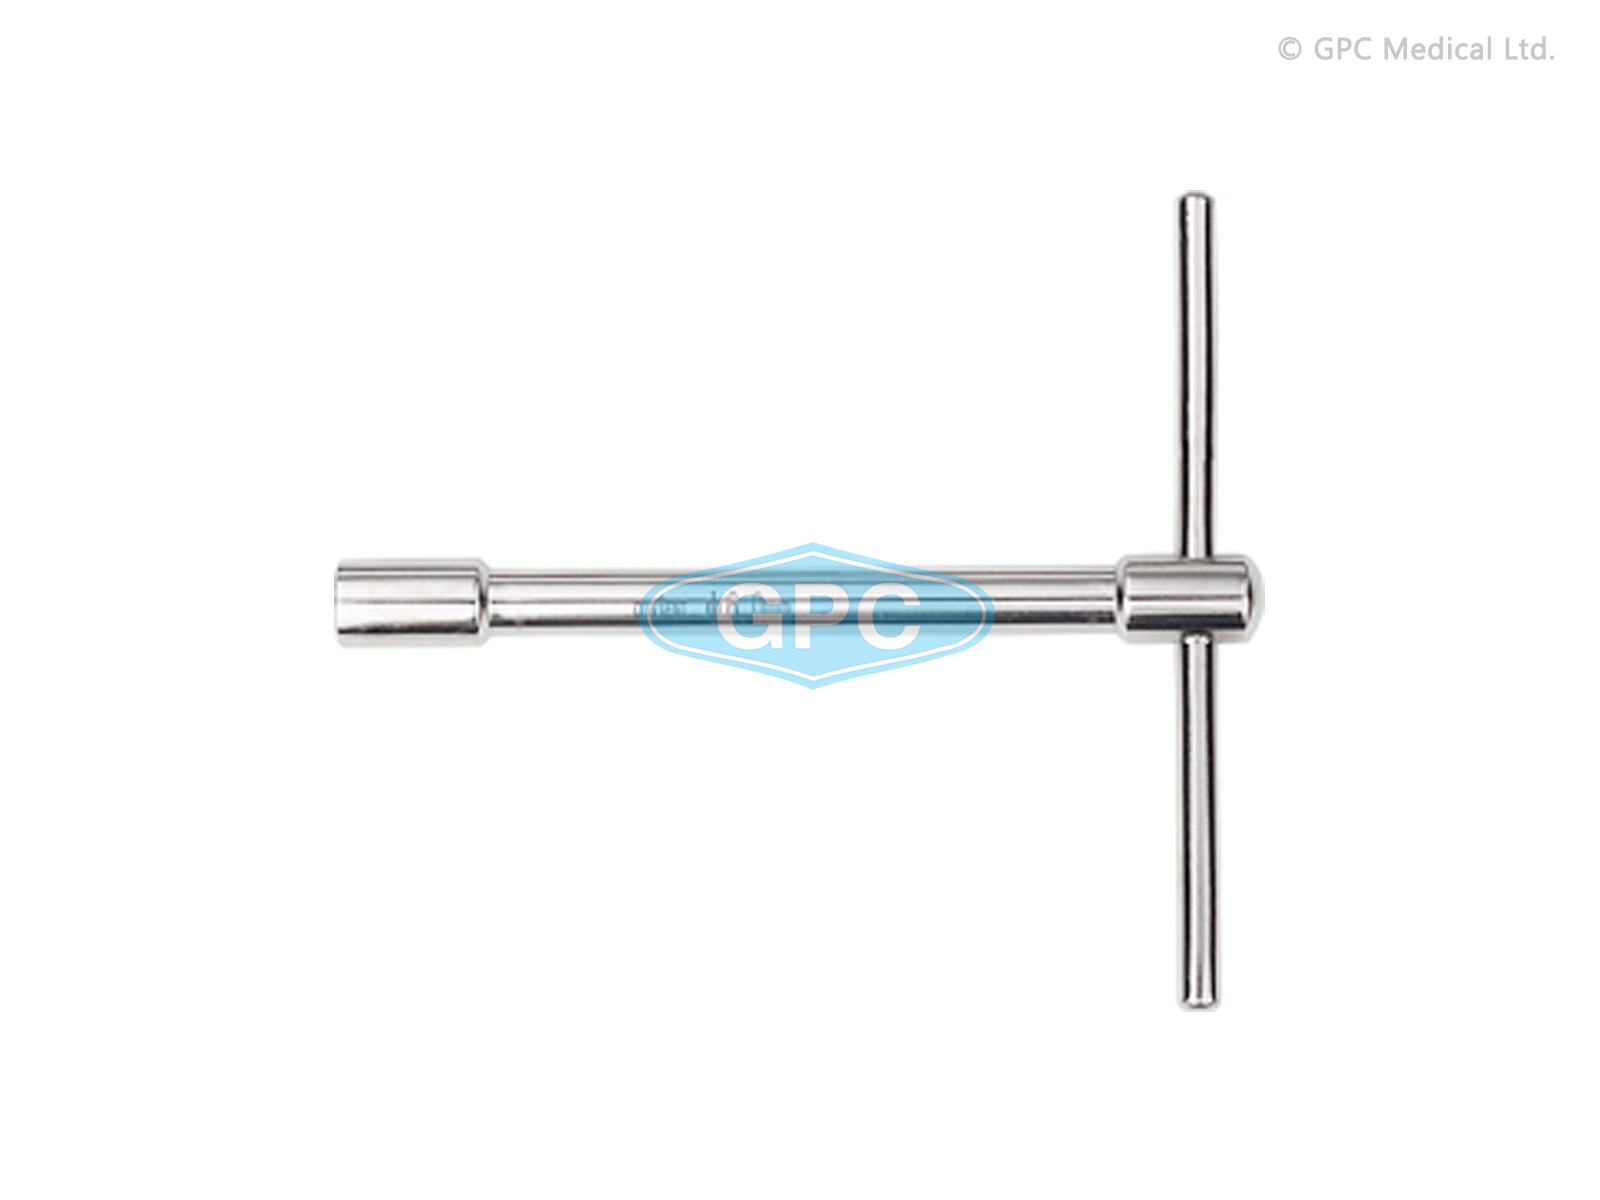 Tapered Pin Introducer